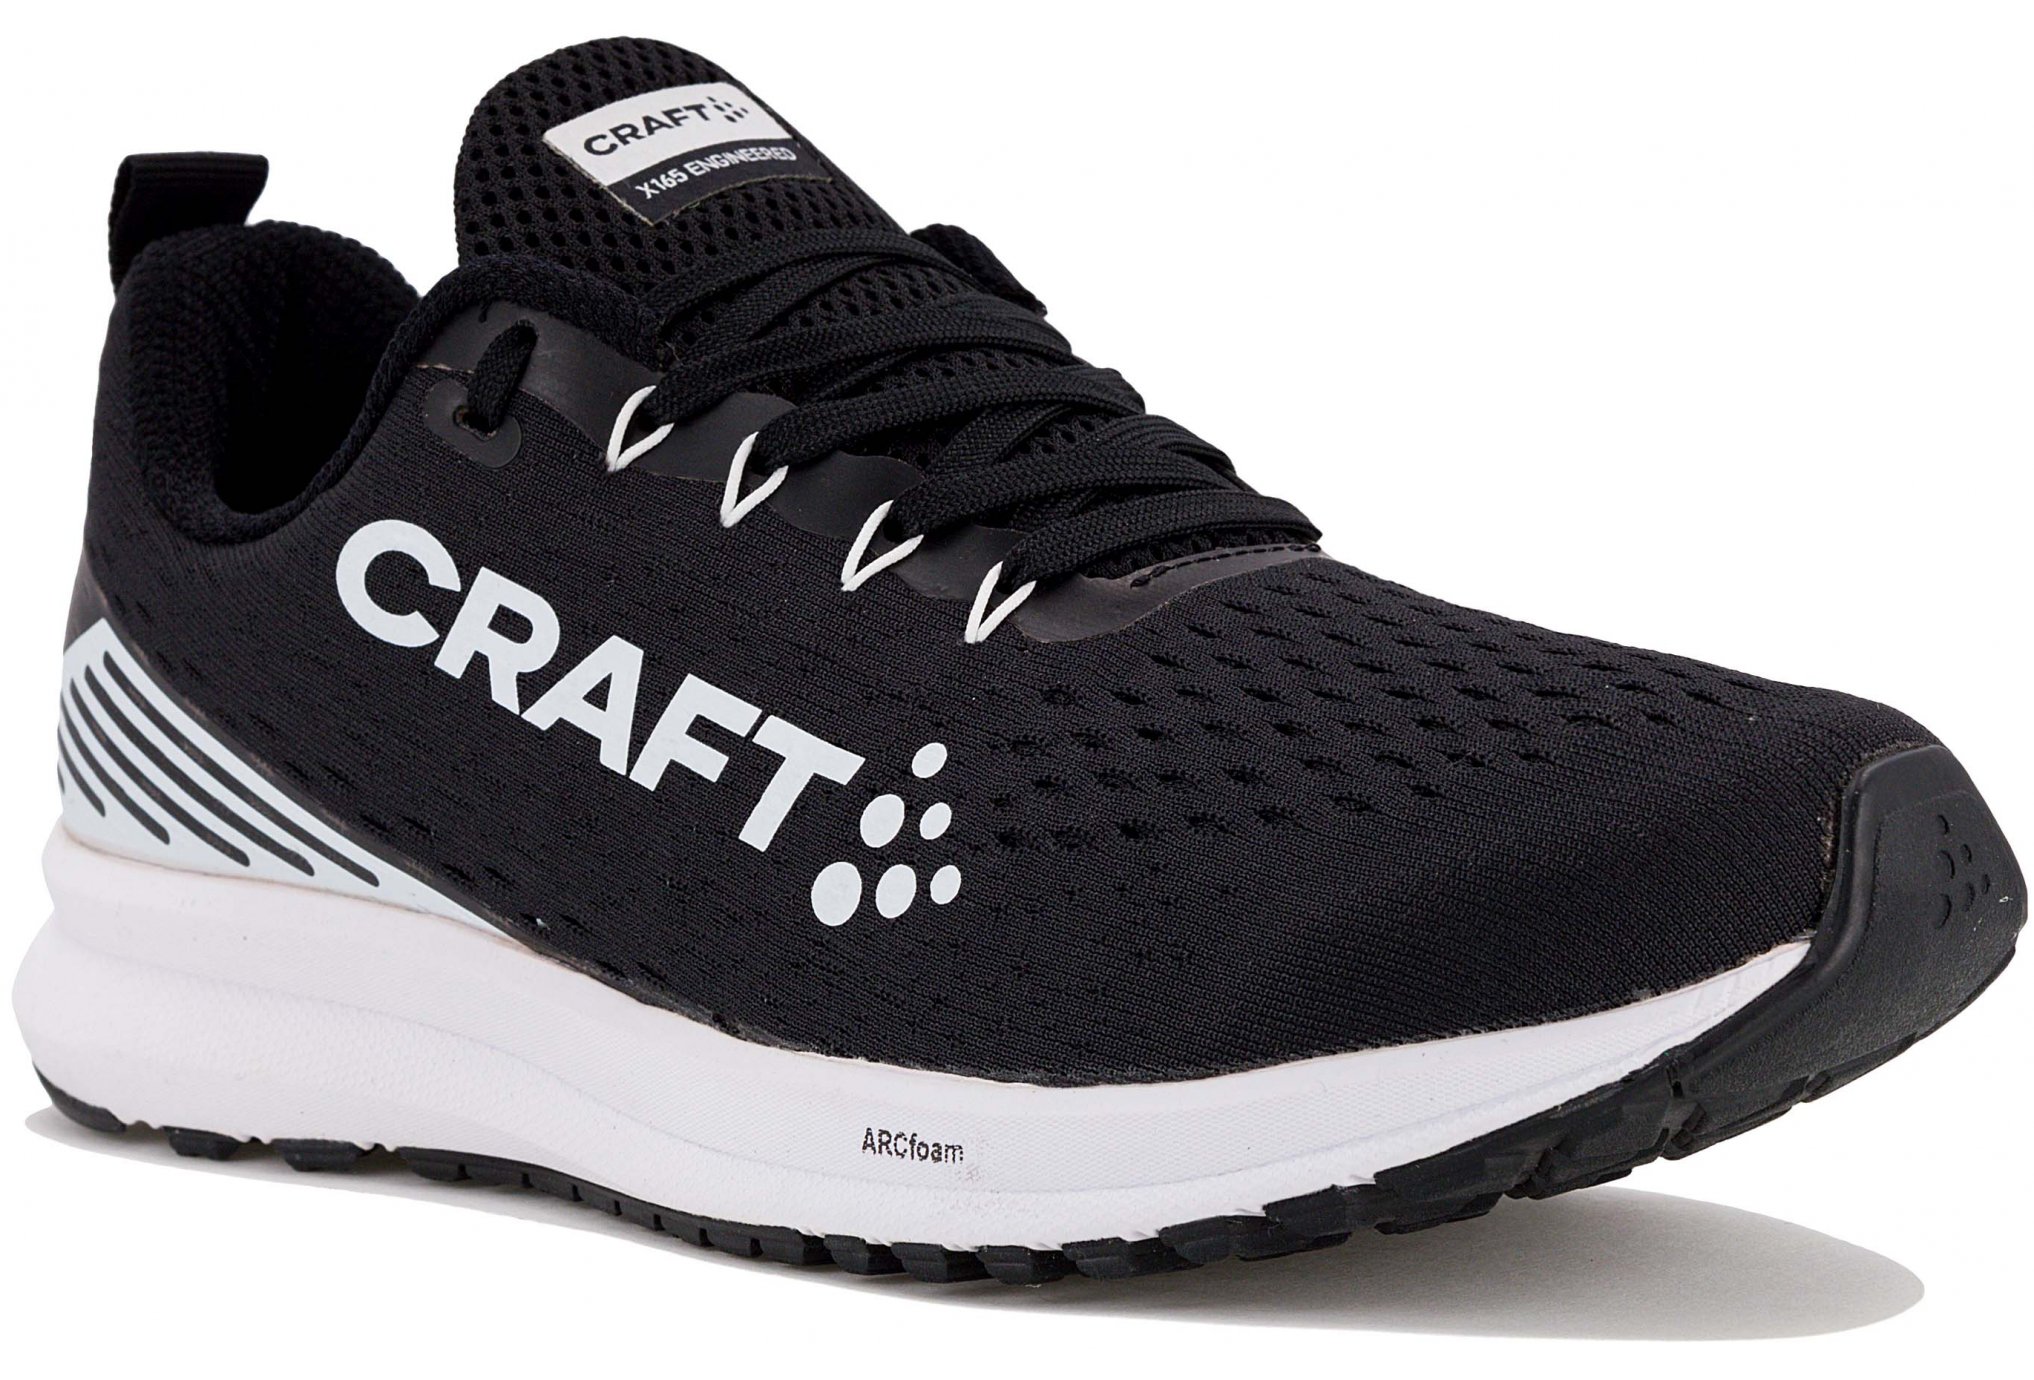 Craft X165 Engineered II M Chaussures homme déstockage